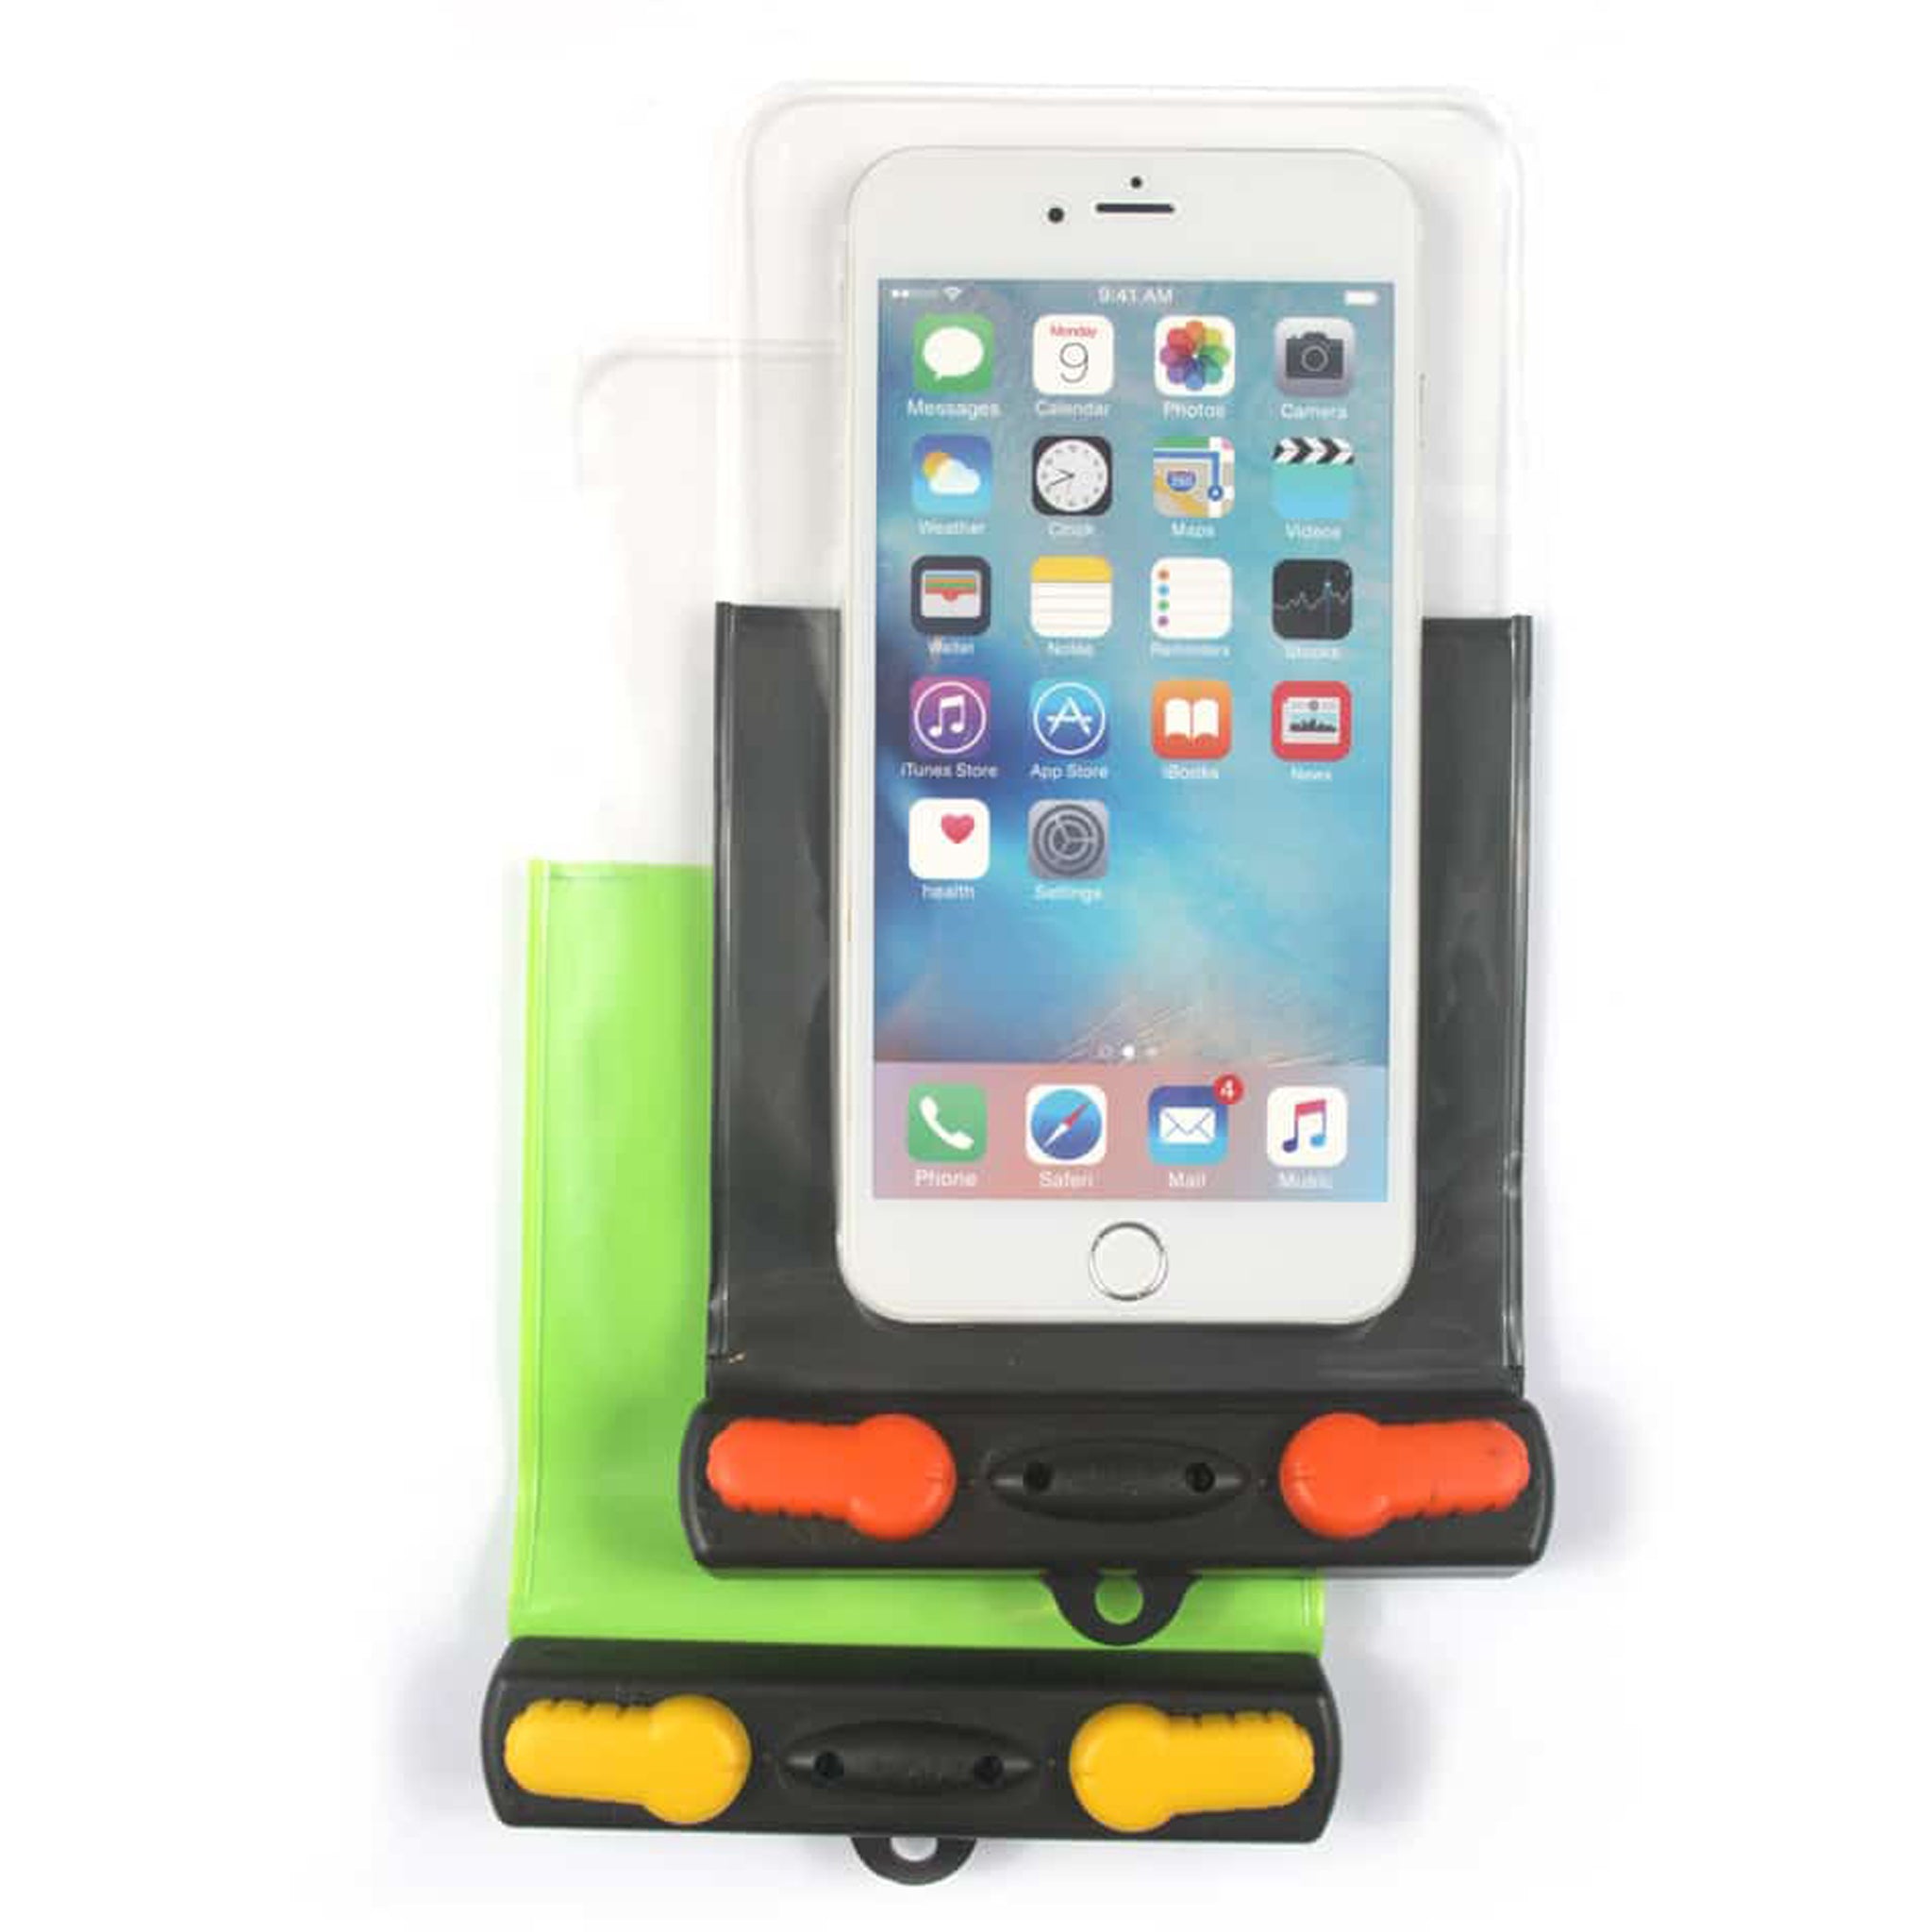 Aquapac Aquasac Economy Phone Dry Pouch Case Fits all iPhones up to 13 or similar